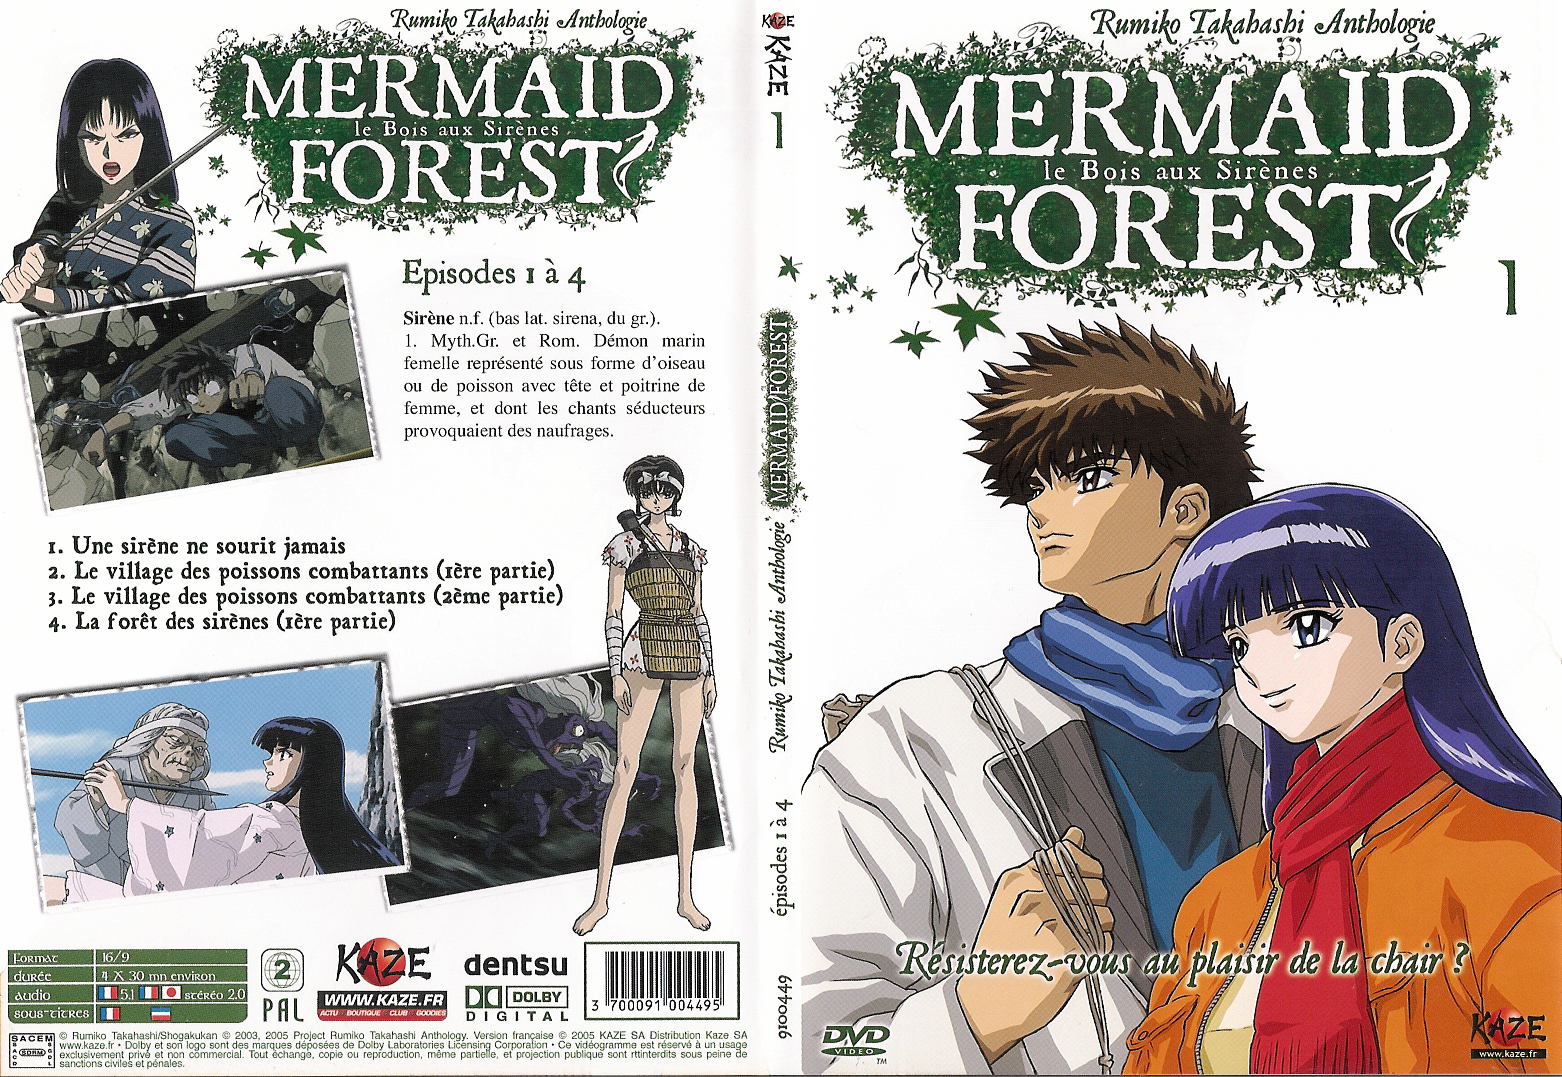 Jaquette DVD Mermaid Forest vol 01